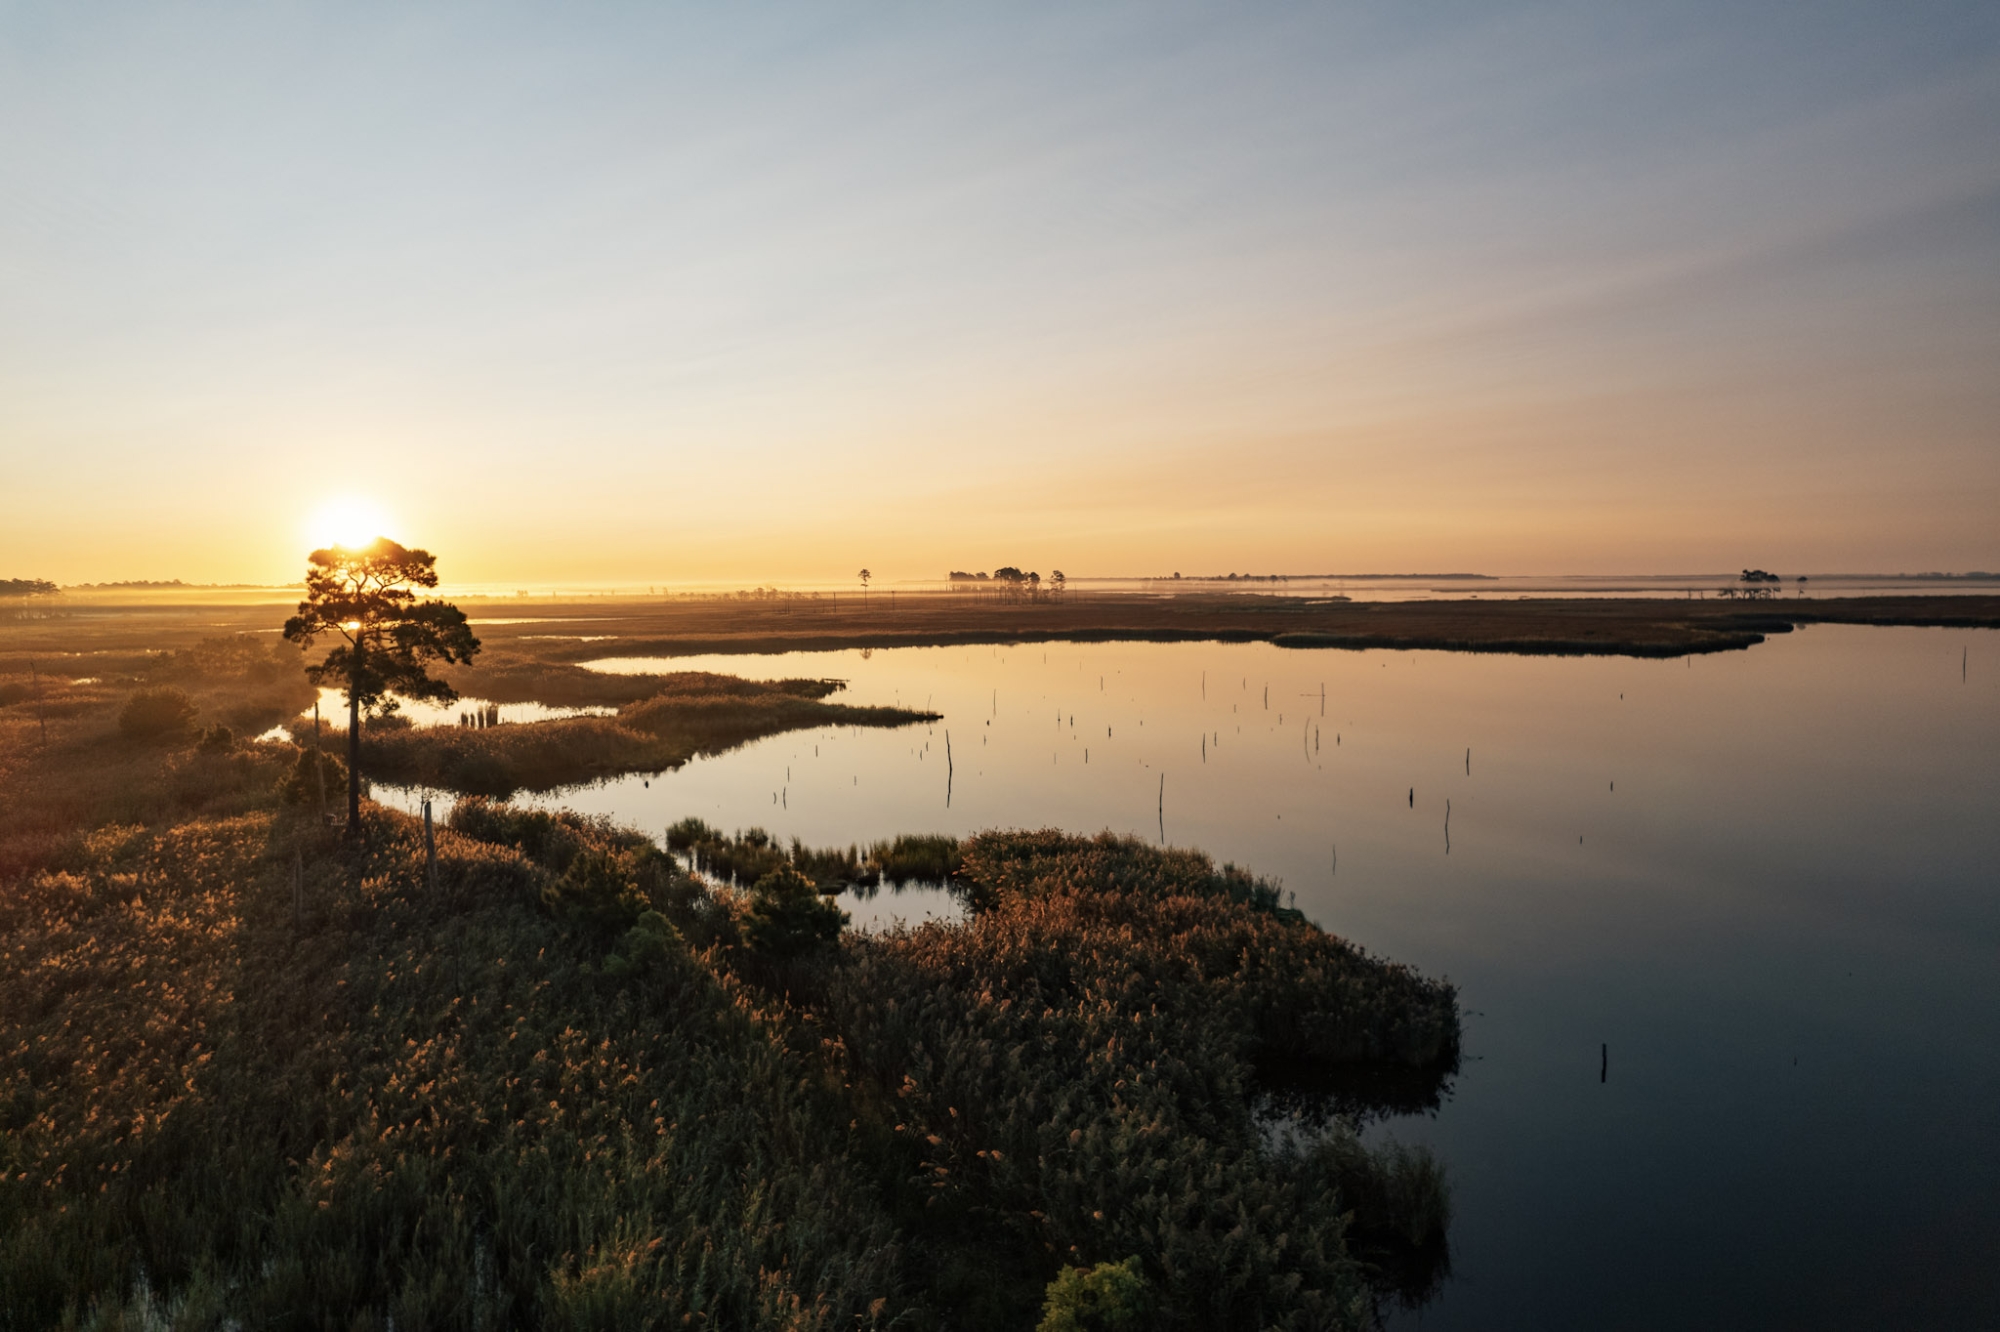 A marsh with a large body of water surrounded by grasses and shrubs at sunset